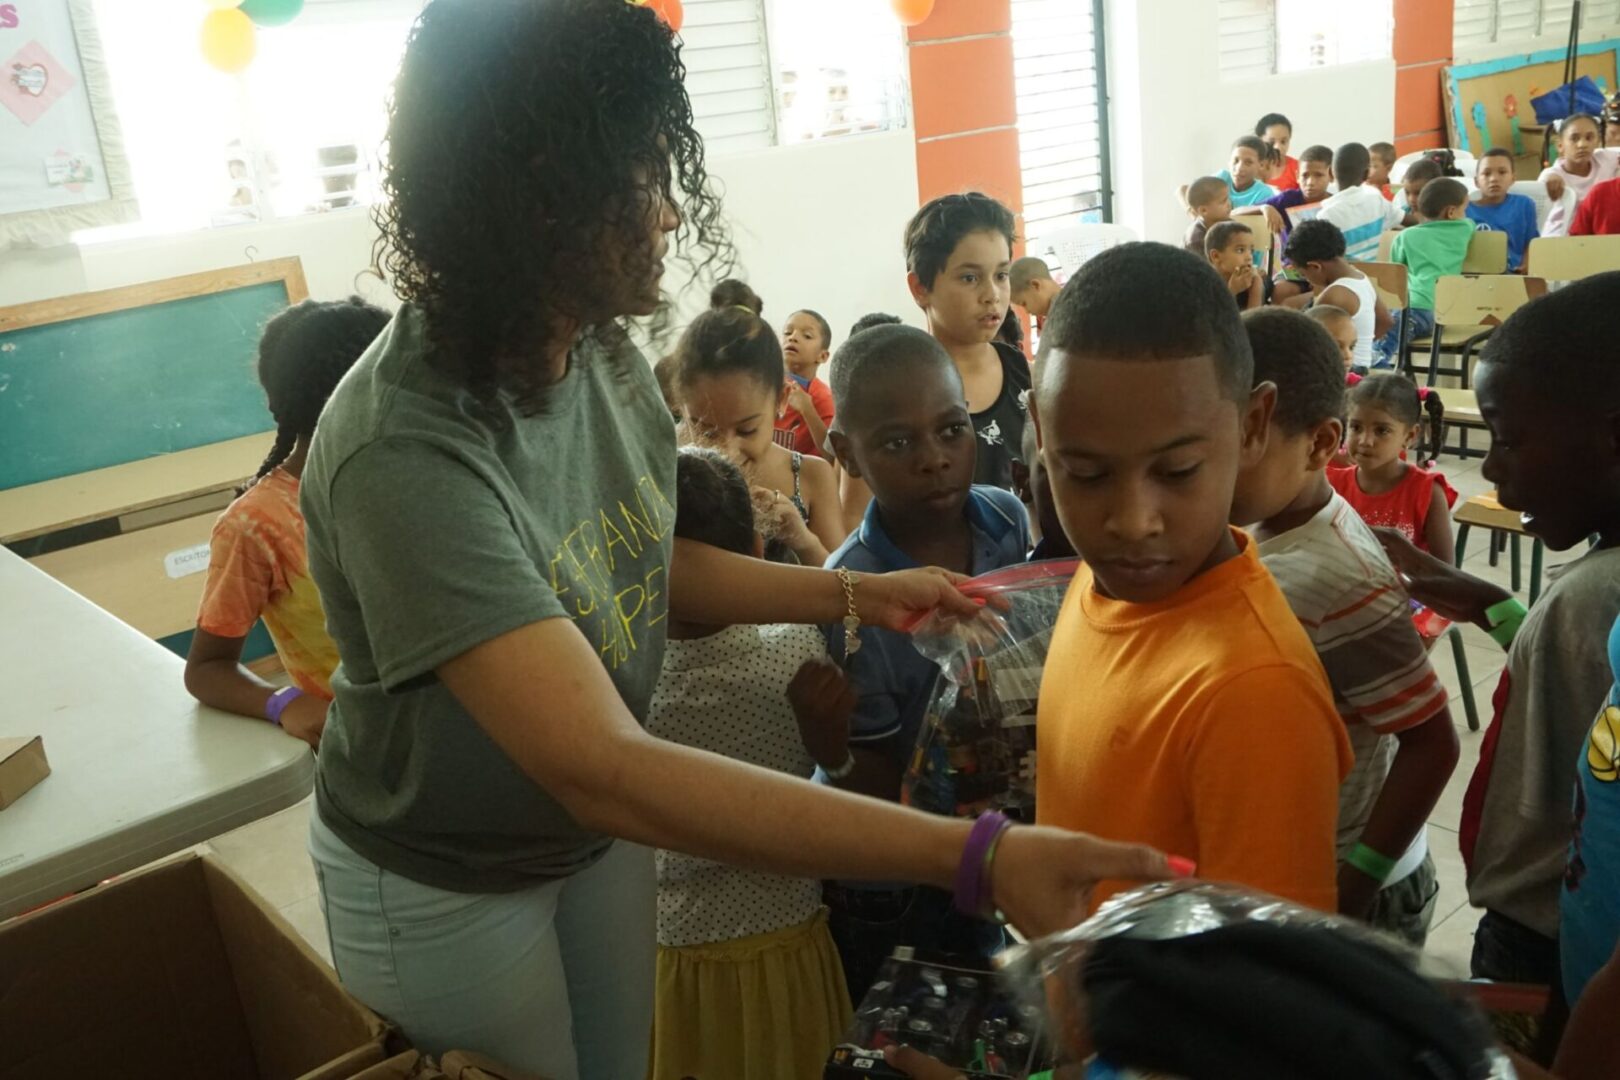 A female staff giving out clothes to children in a classroom (scaled)